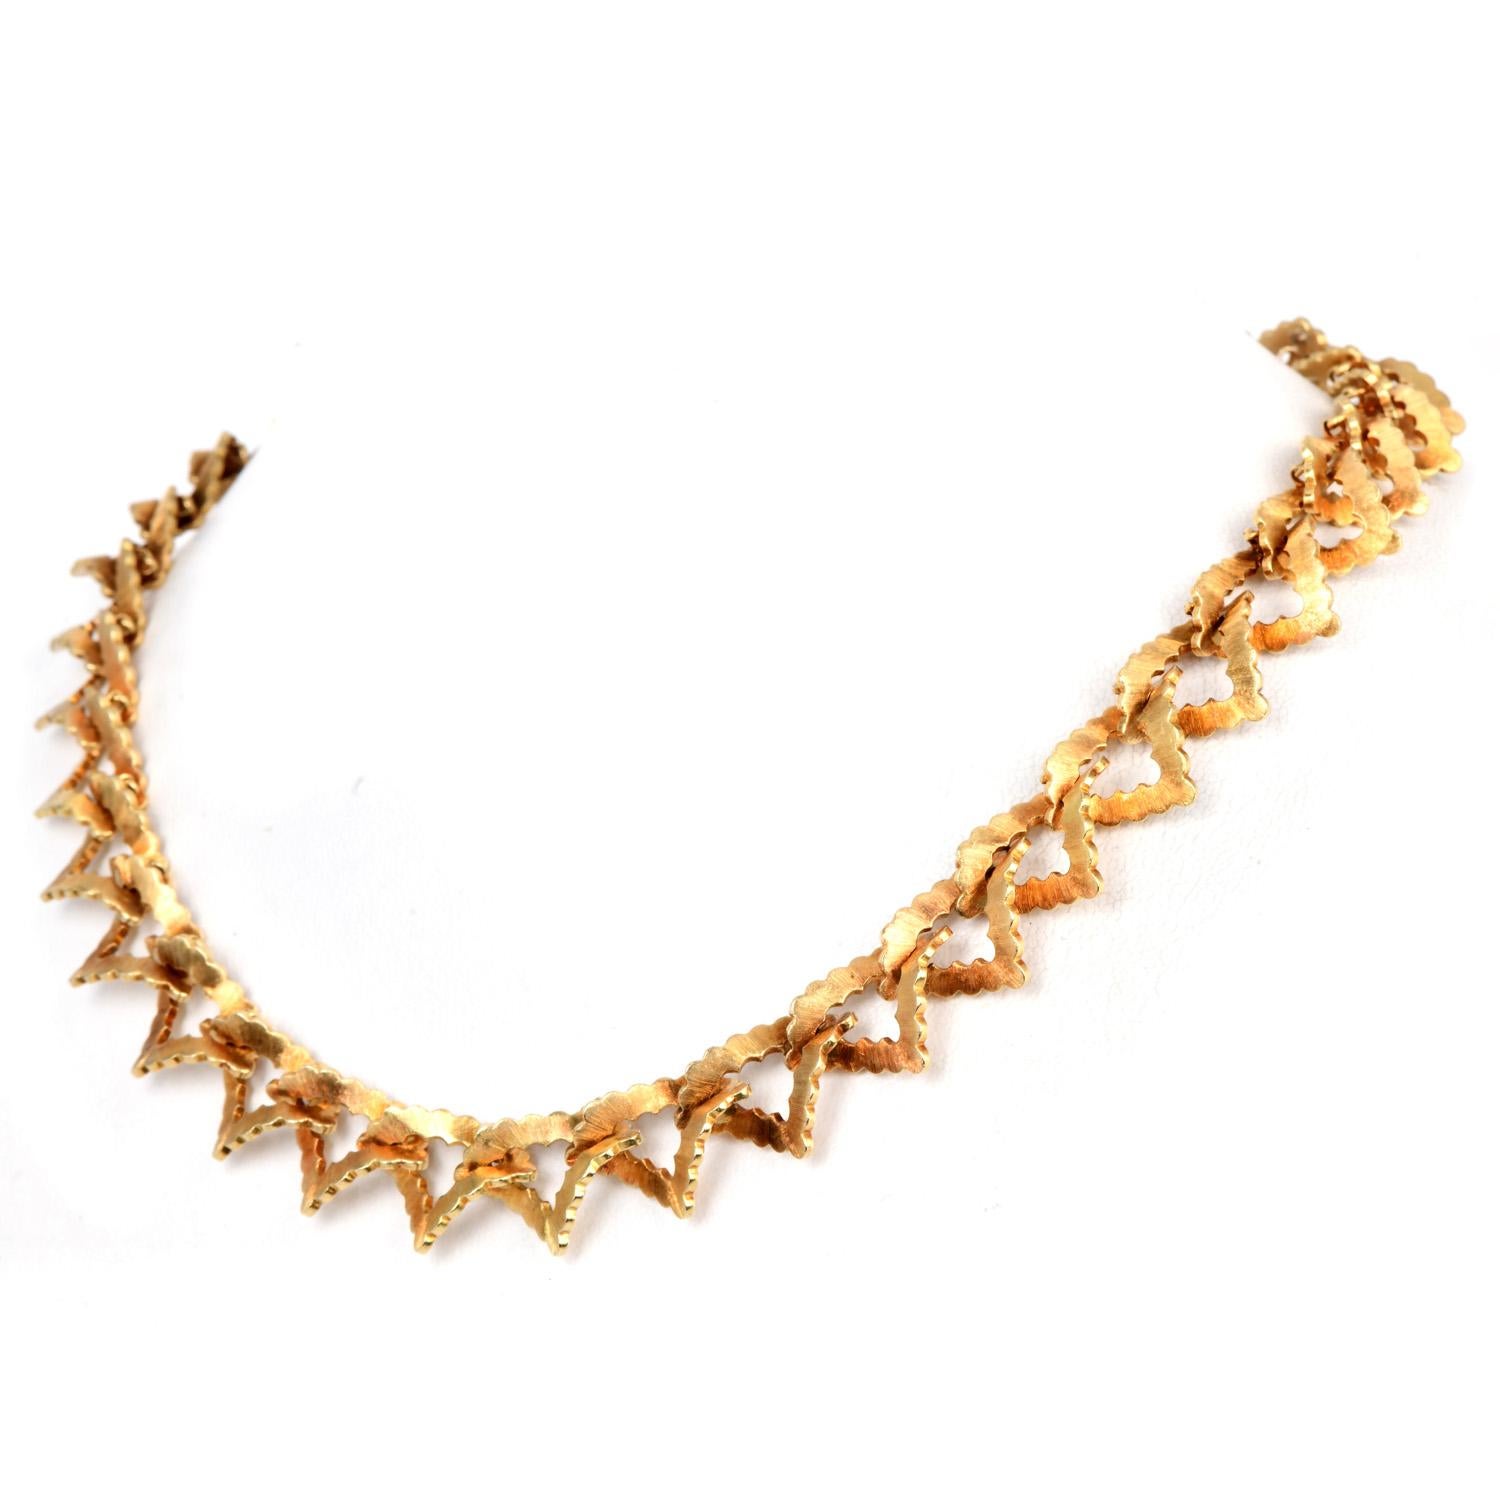 Collectible Stunning vintage Mario Buccellati triangular link chain statement necklace forged in 18K Yellow gold.

From the world-renowned house of Mario Buccellati known for its uniquely crafted designs. 

The Necklace has gorgeous triangular